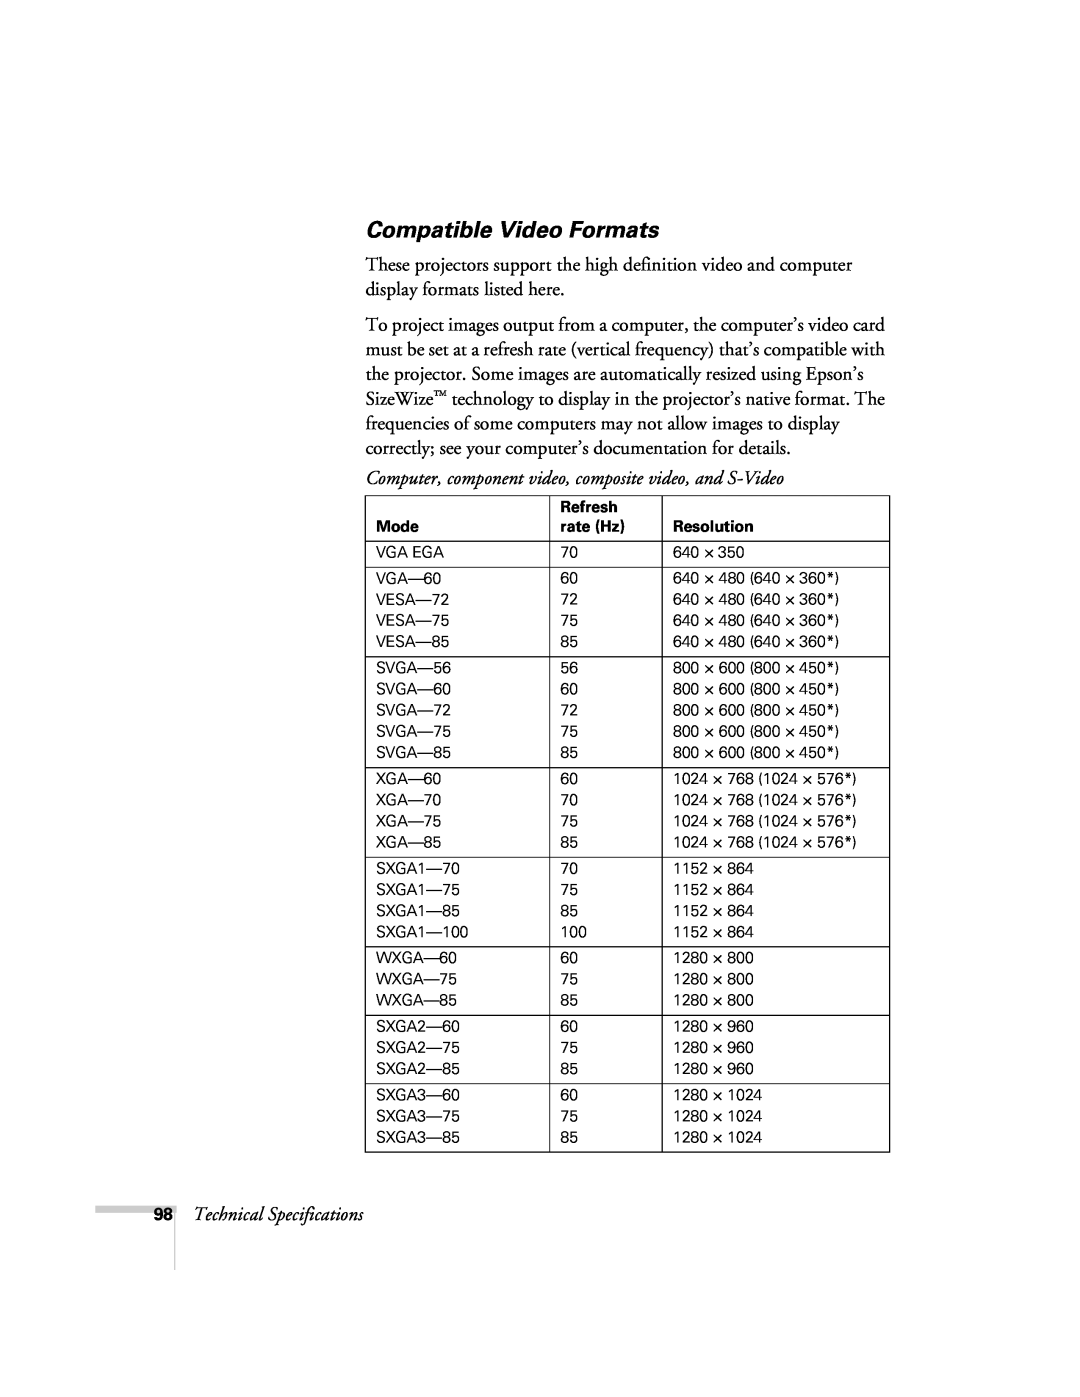 Univex 700 Compatible Video Formats, Computer, component video, composite video, and S-Video, Technical Specifications 